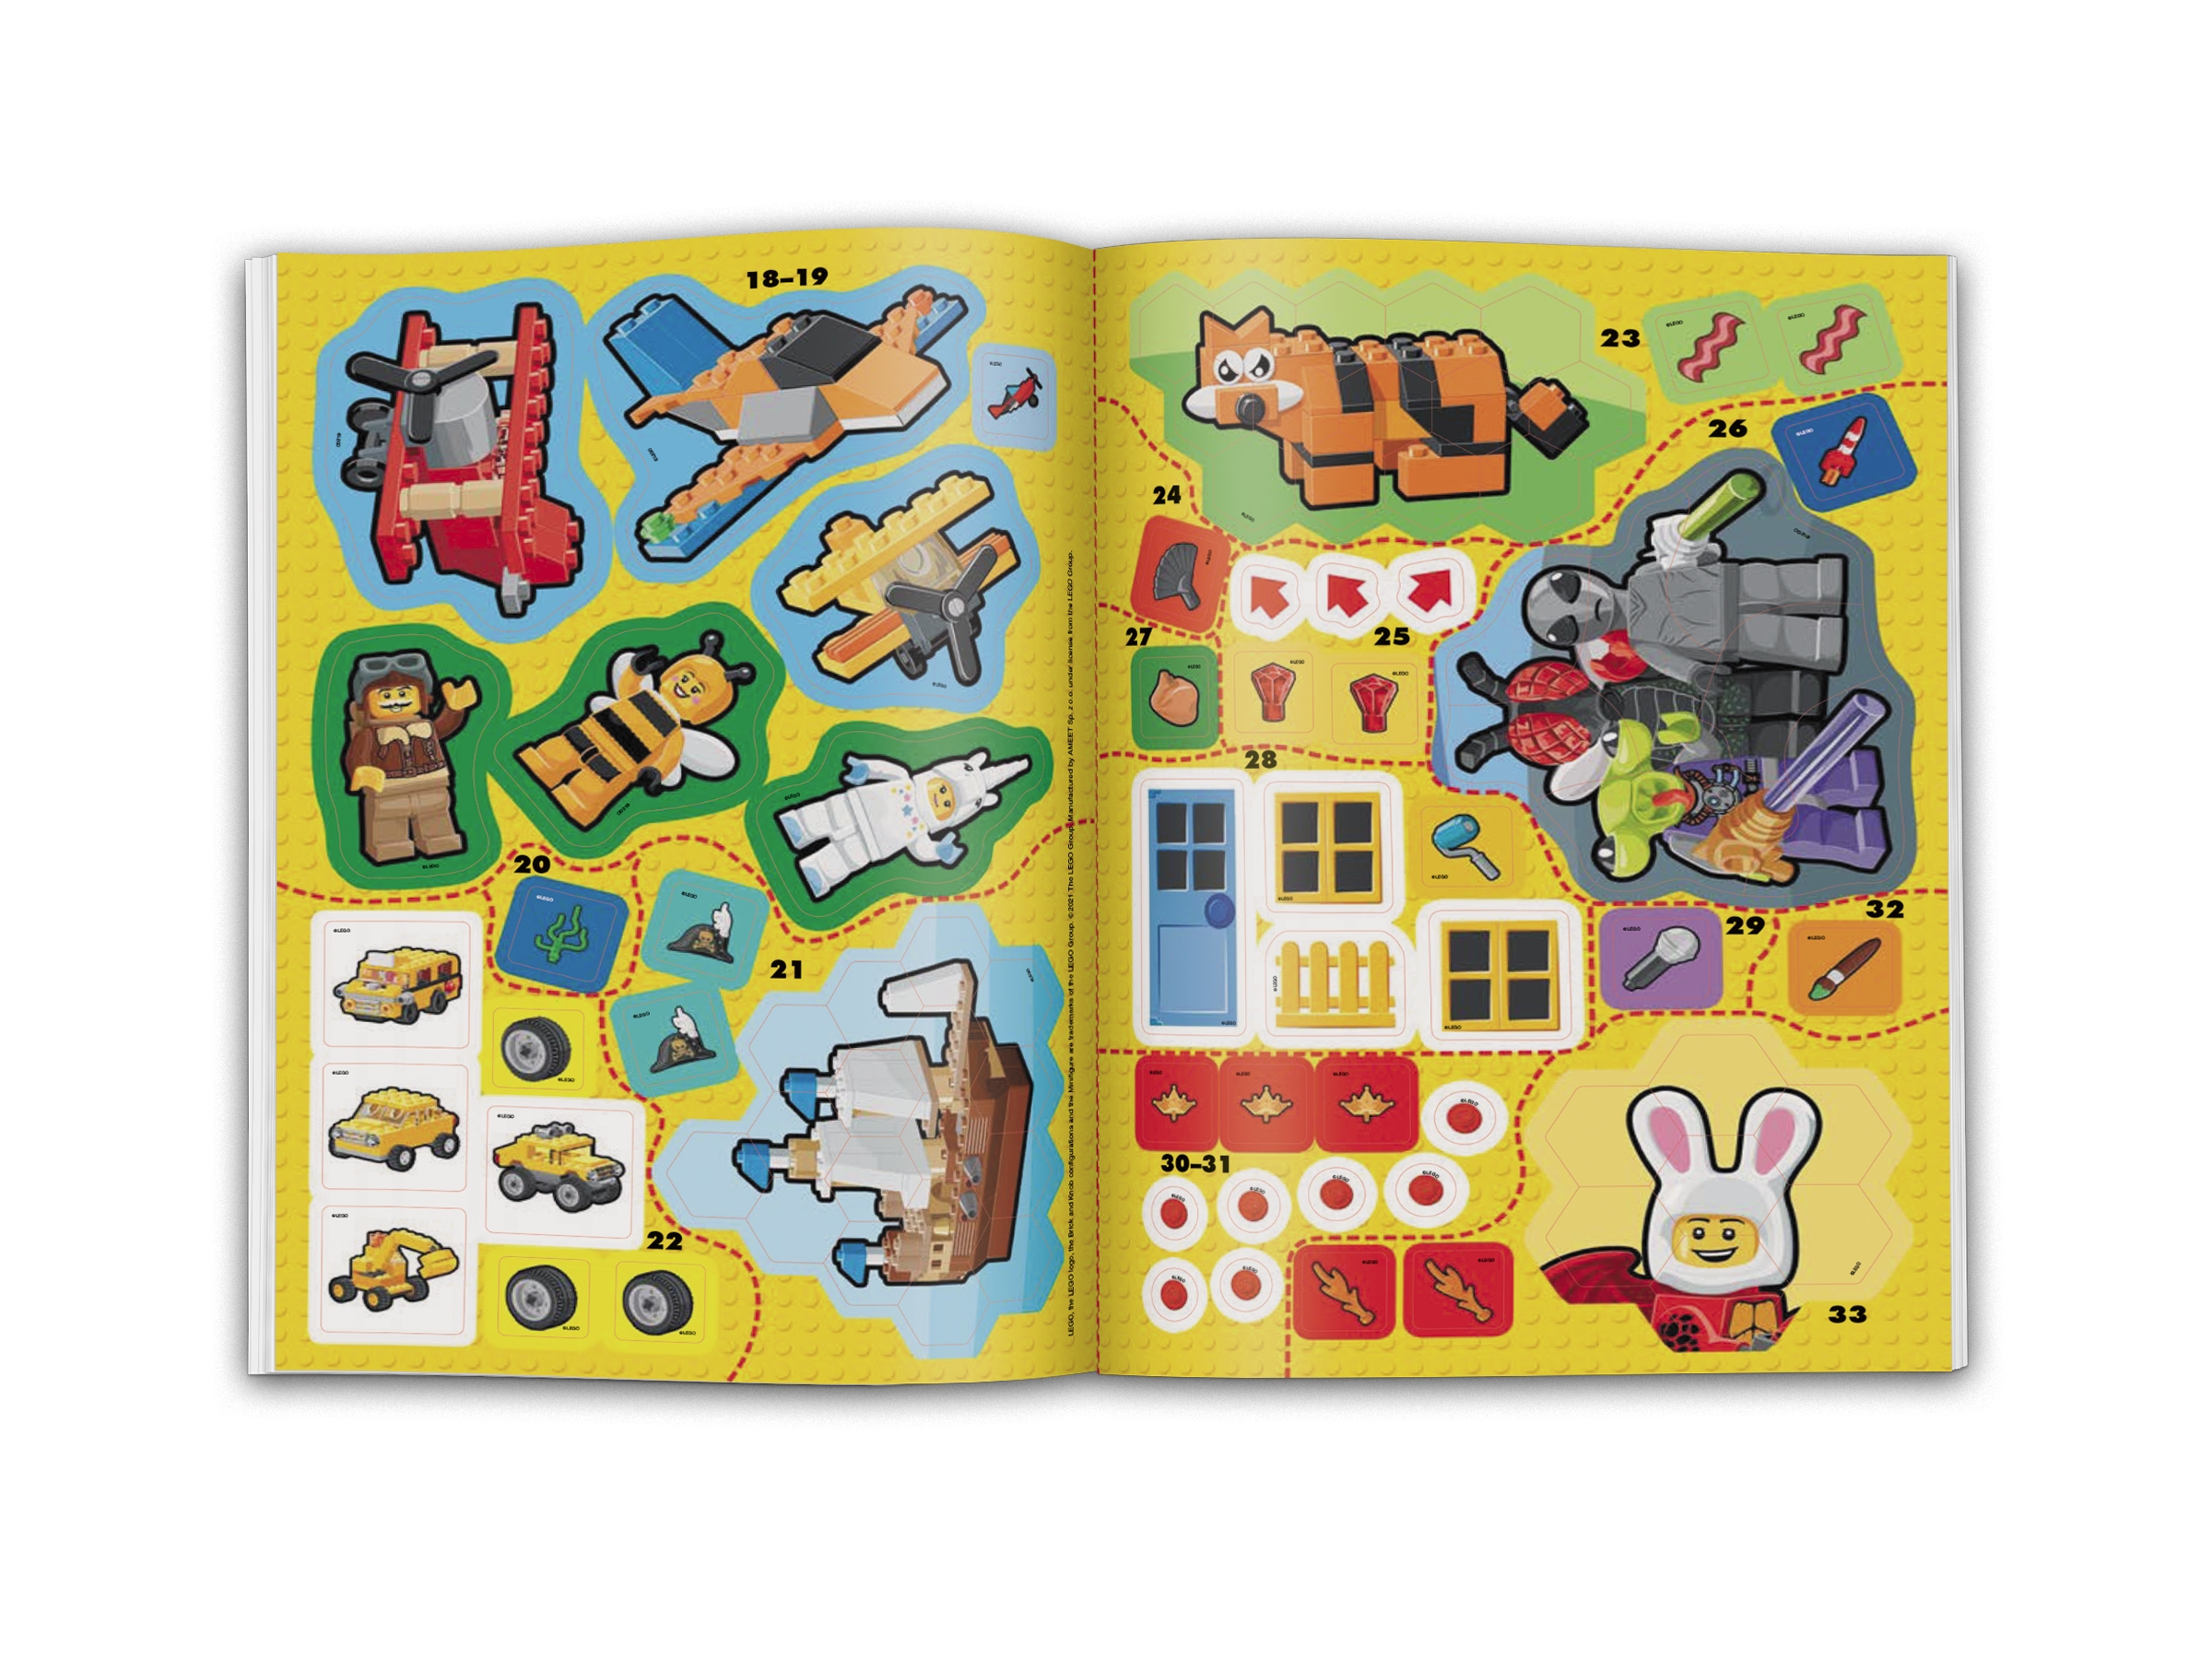 LEGO® 1,001 Stickers Activity Book 5007393 | | Buy online at the Official LEGO® Shop GB